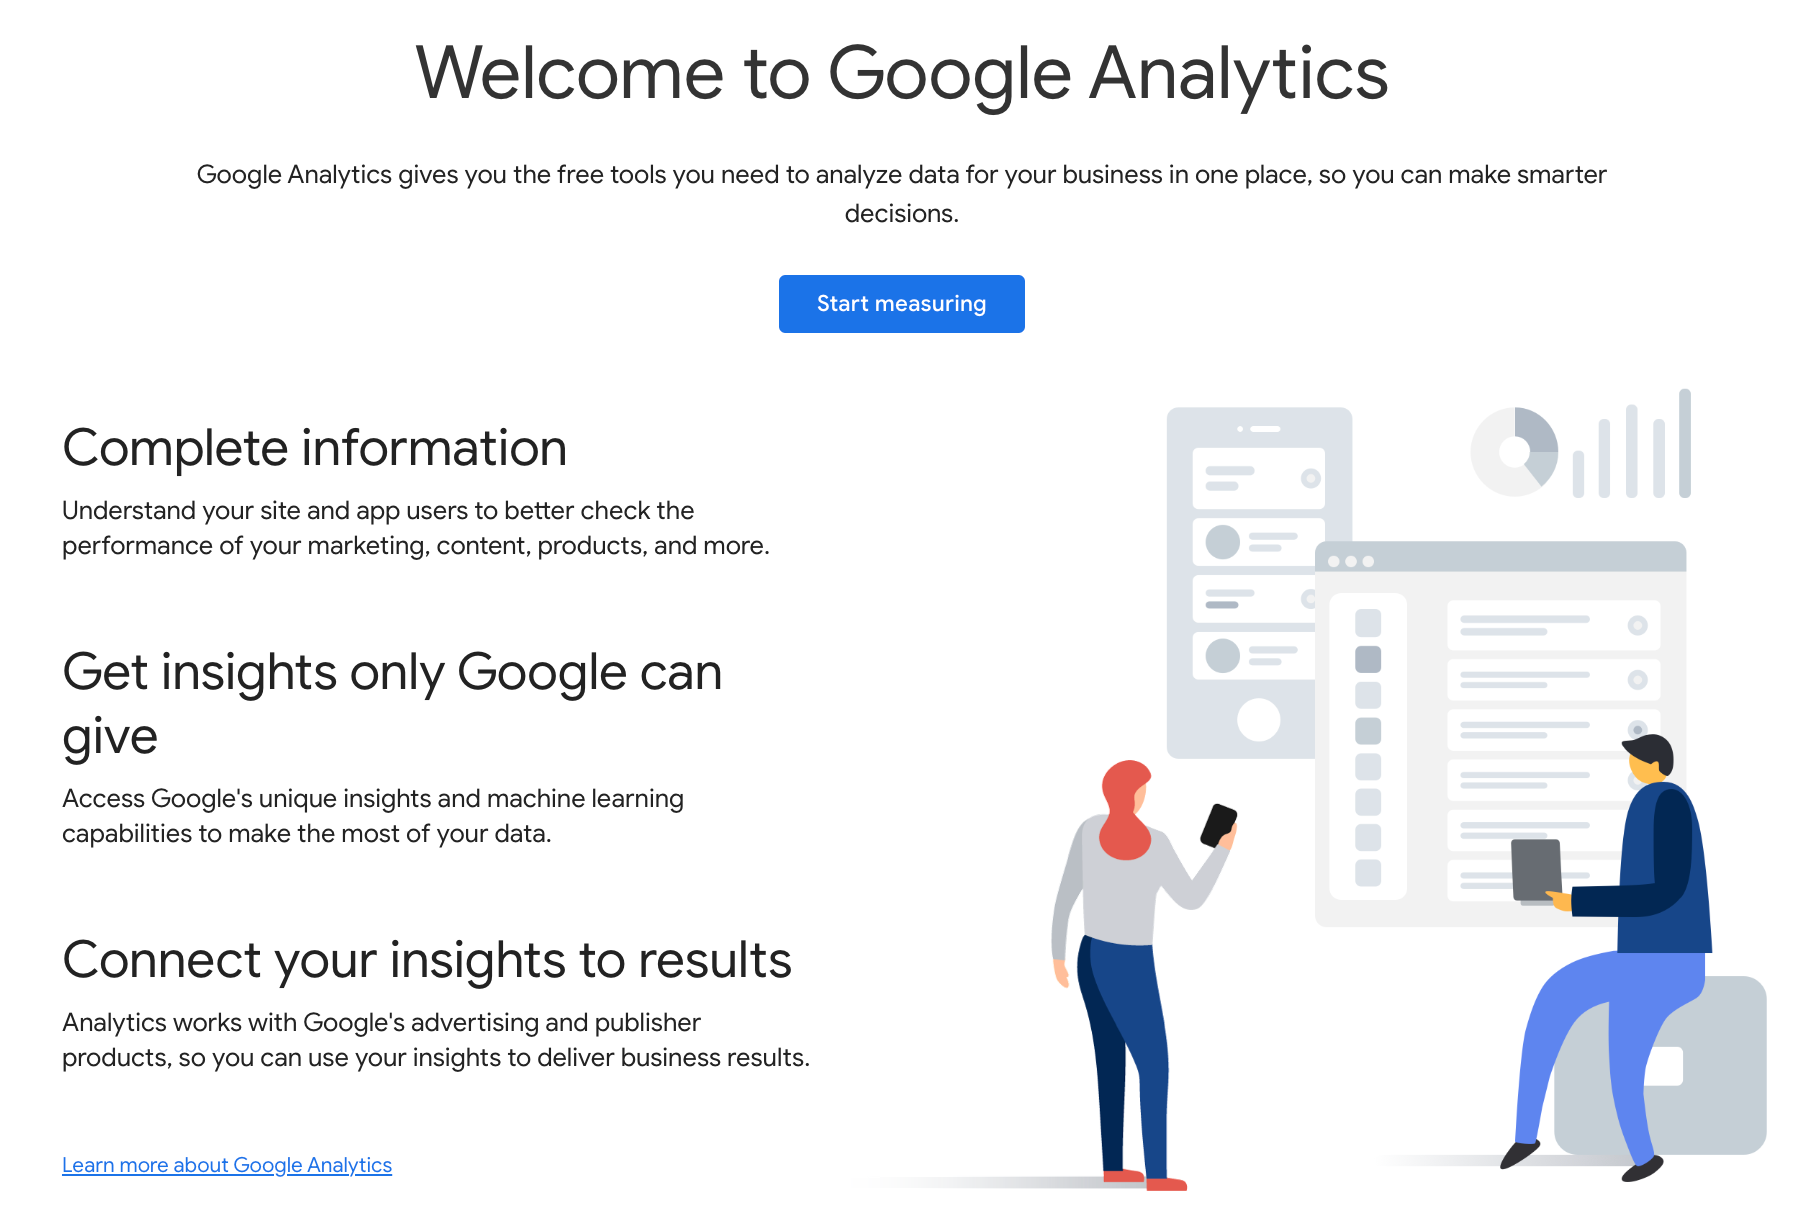 Step 1 - Opening a Google Analytics account